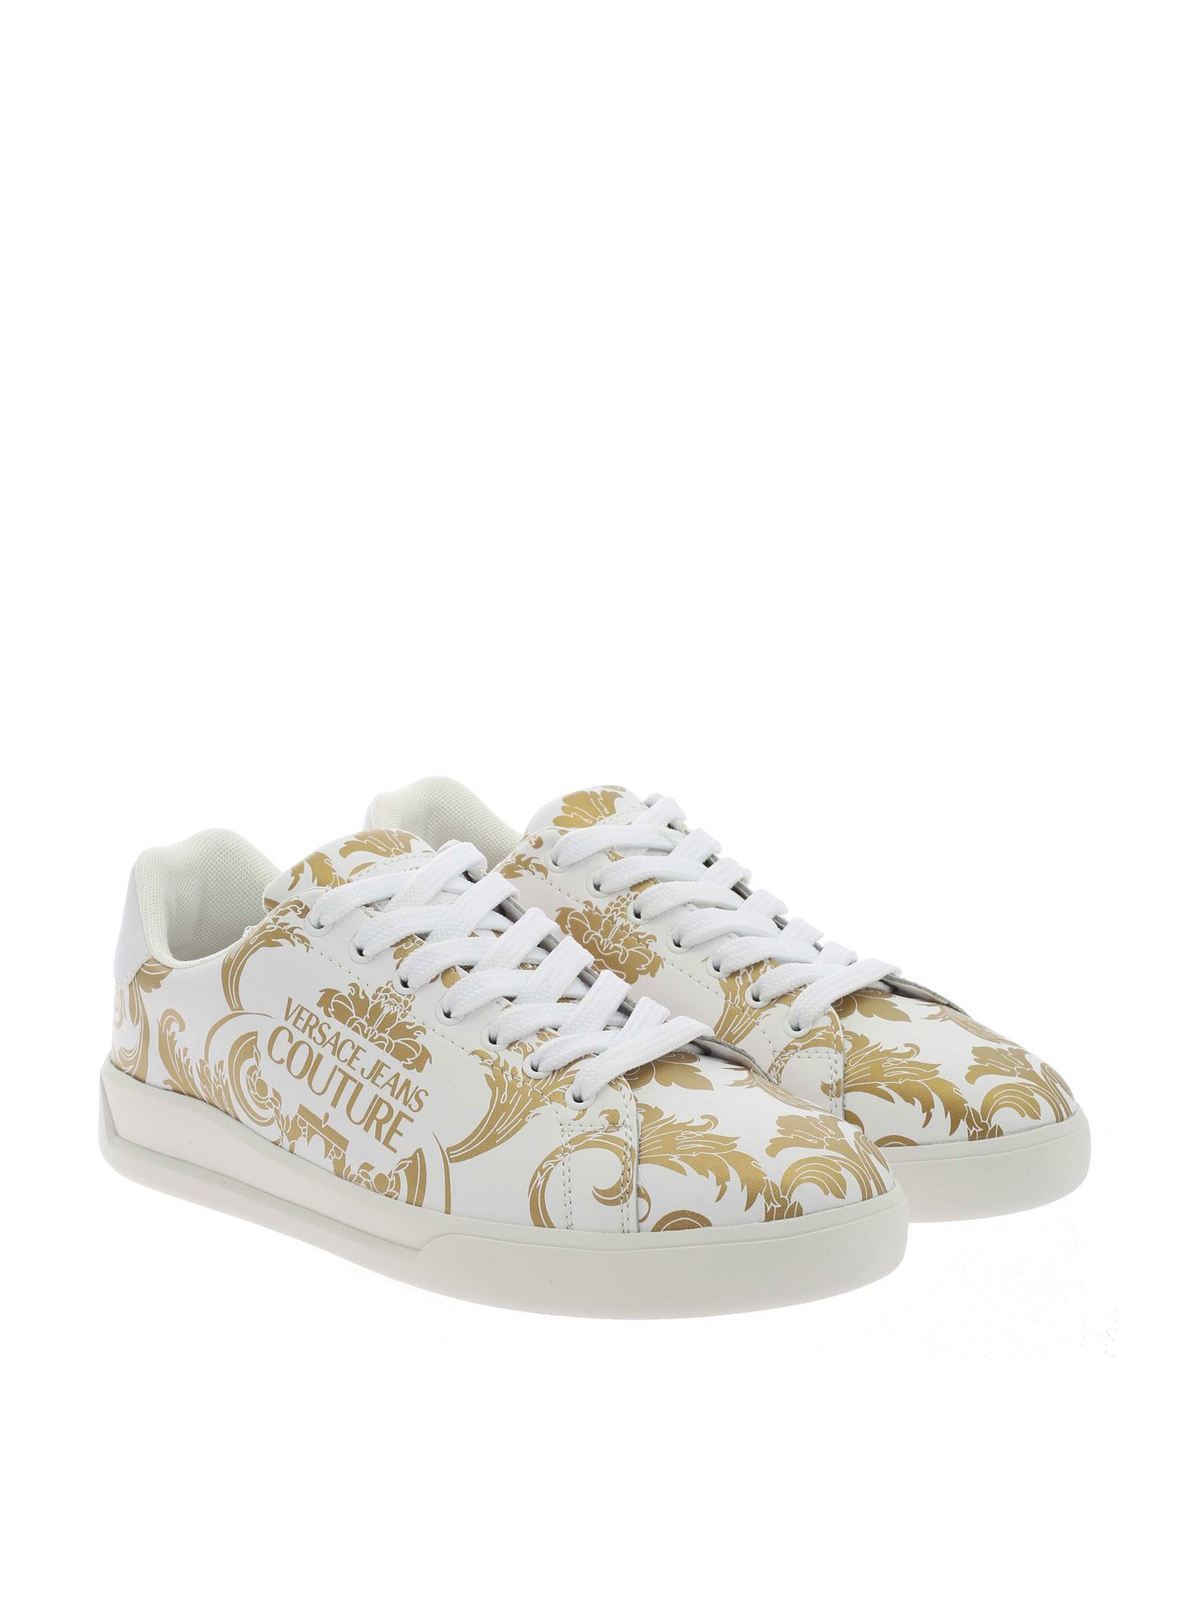 Women's Shoes Sneakers VERSACE JEANS White Coated Print Logo Gold New 